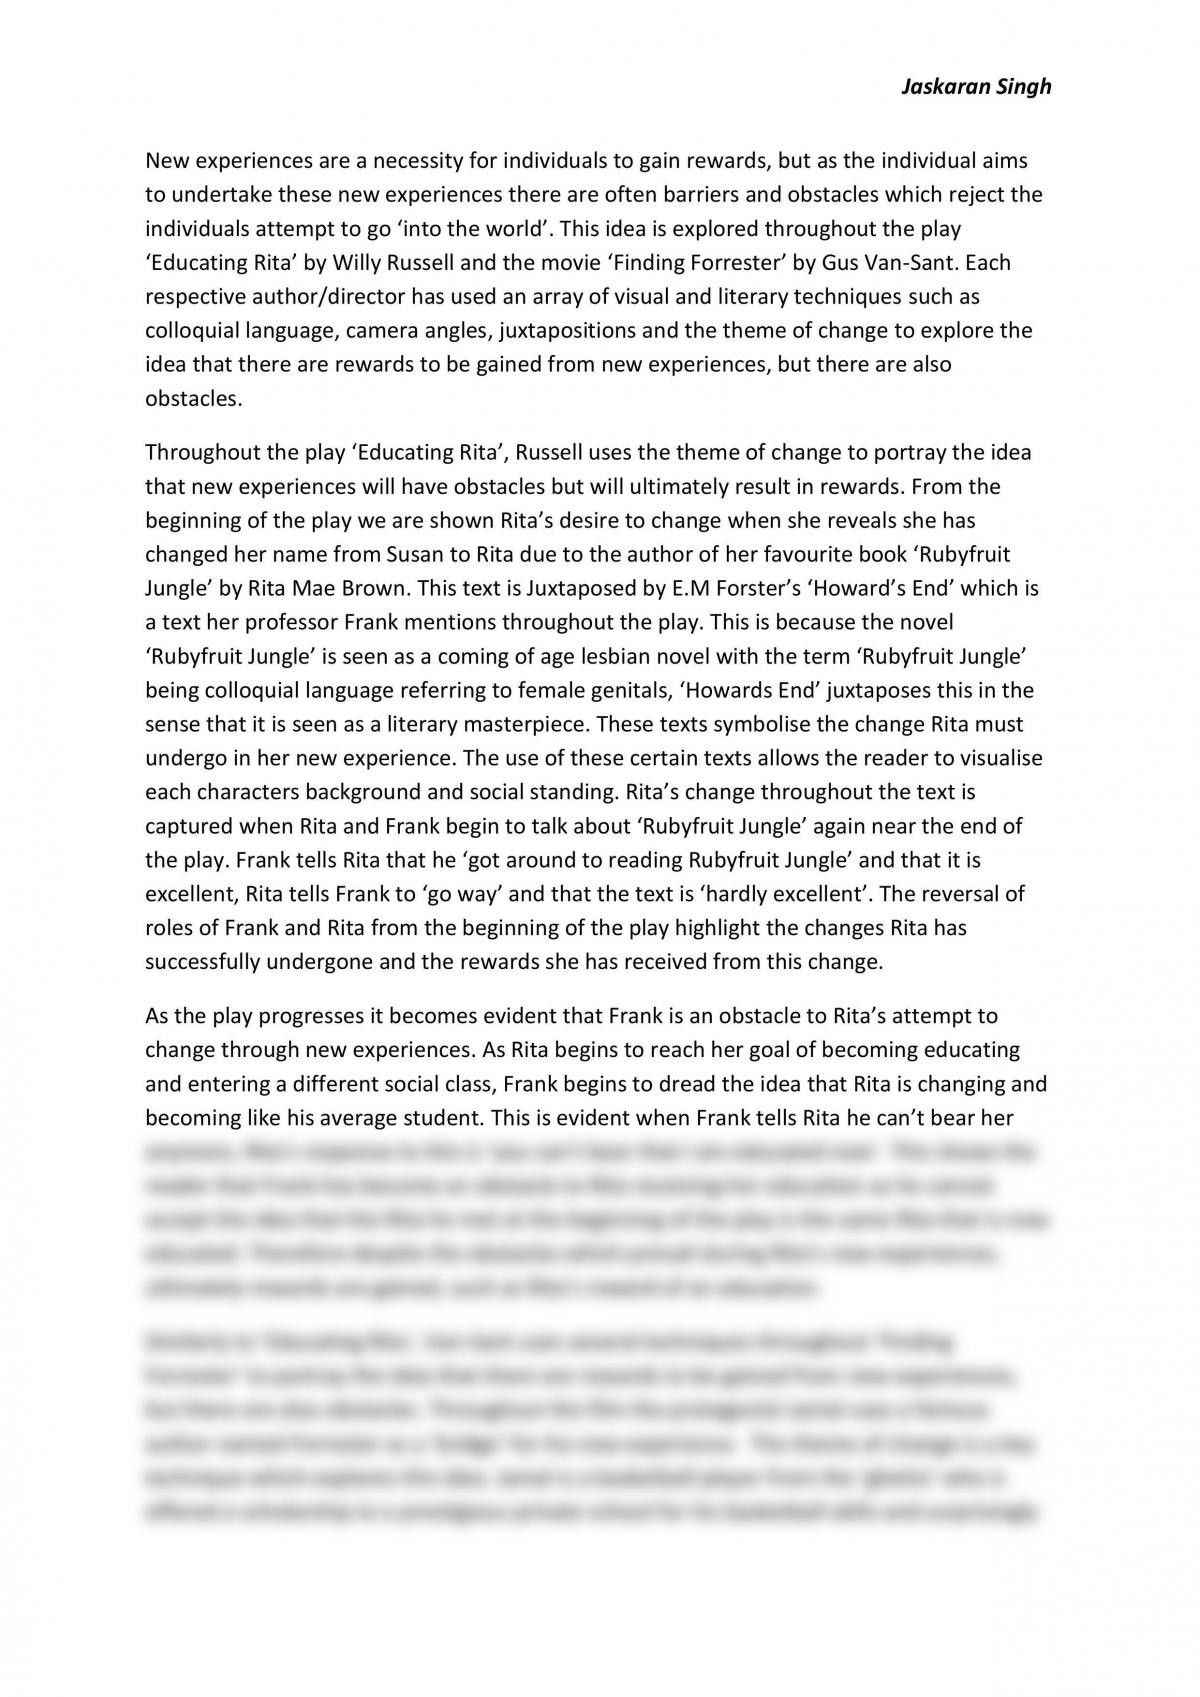 Into the World- Educating Rita and Finding Forrester Essay - Page 1